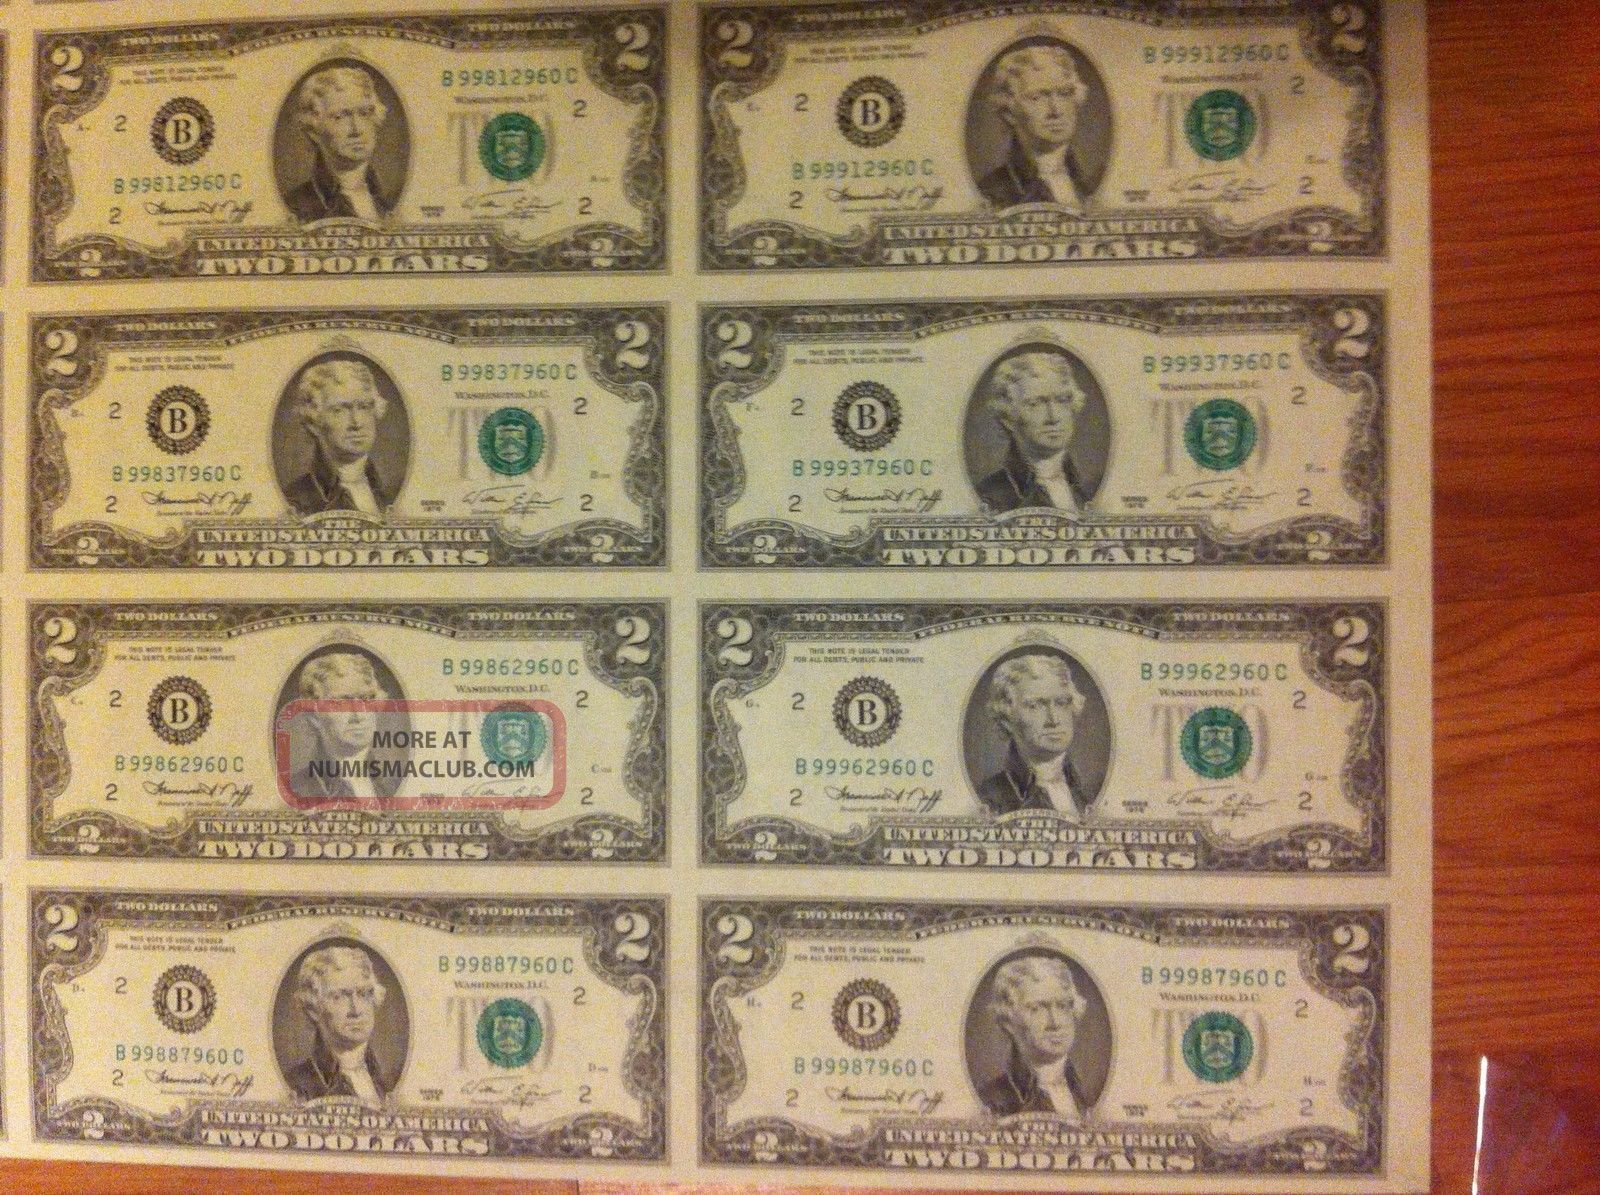 2009 Uncut Sheet $2 X 8 Early Release Crisp - Fresh 2 Dollars Extremely Rare Small Size Notes photo